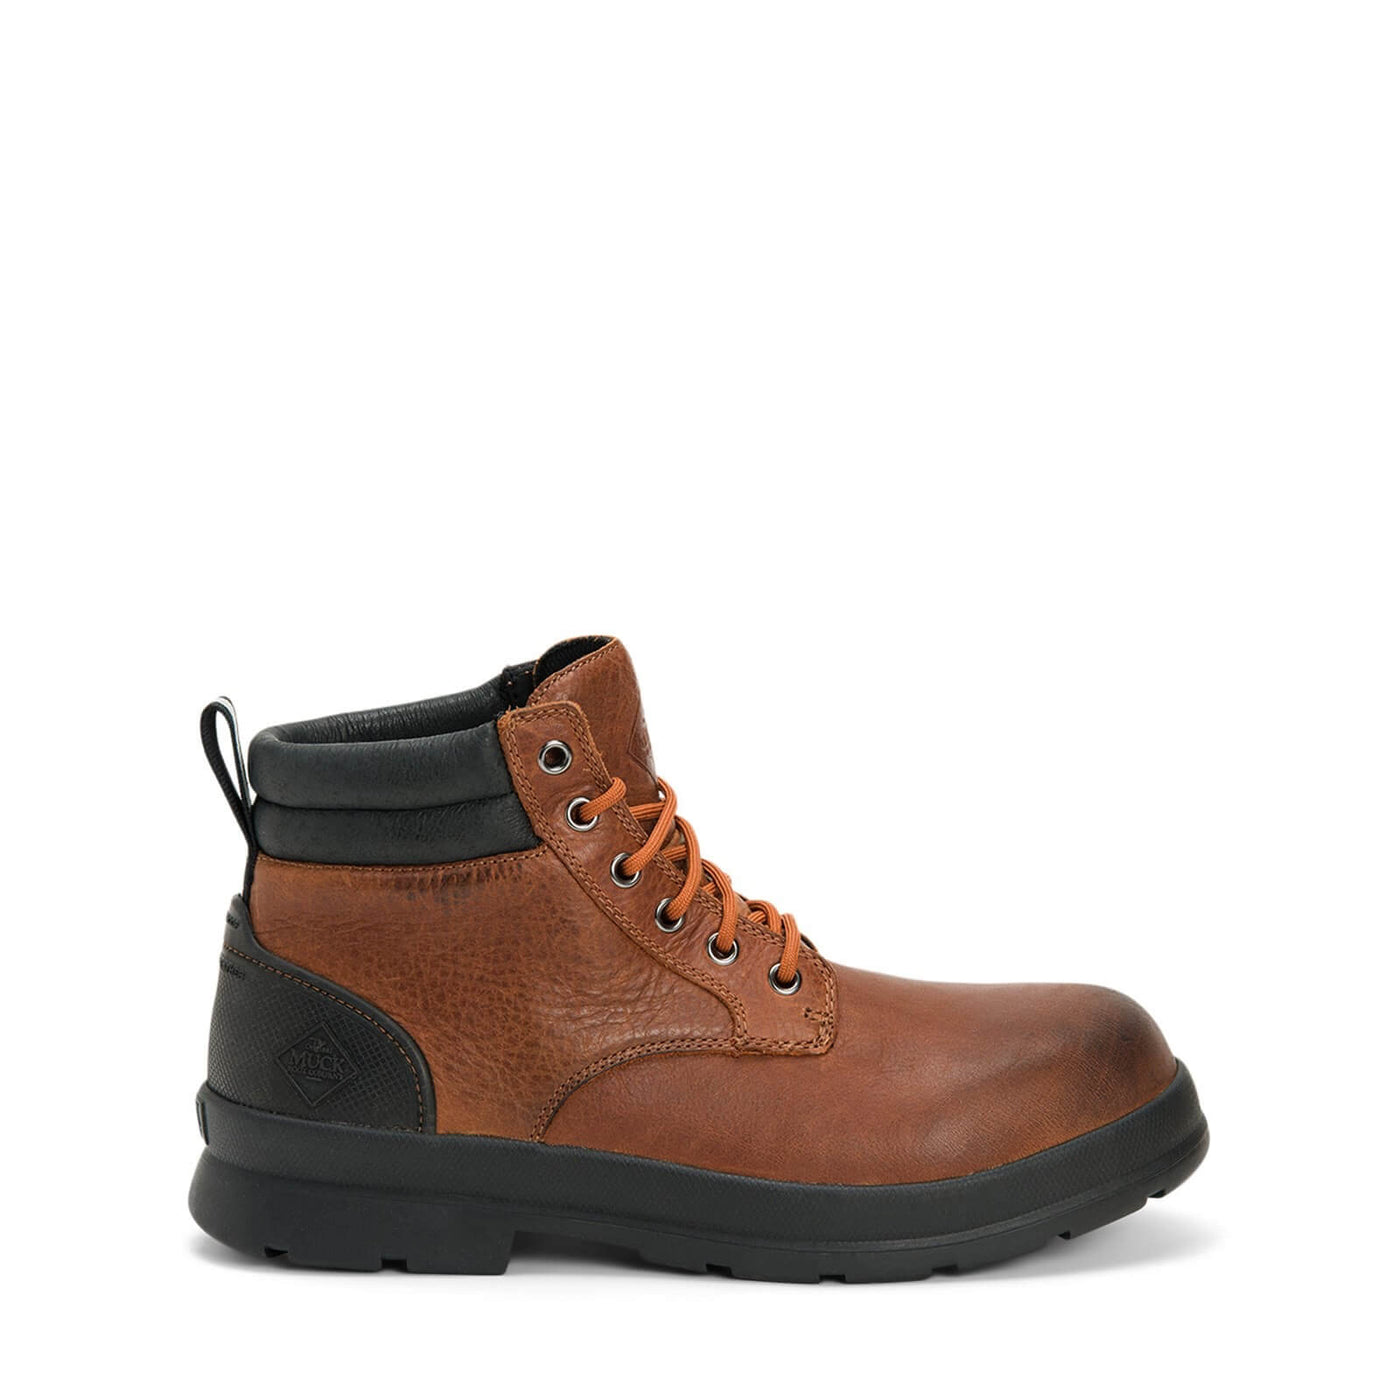 Muck Boots Chore Farm Leather Lace Up Boots Caramel 1#colour_caramel